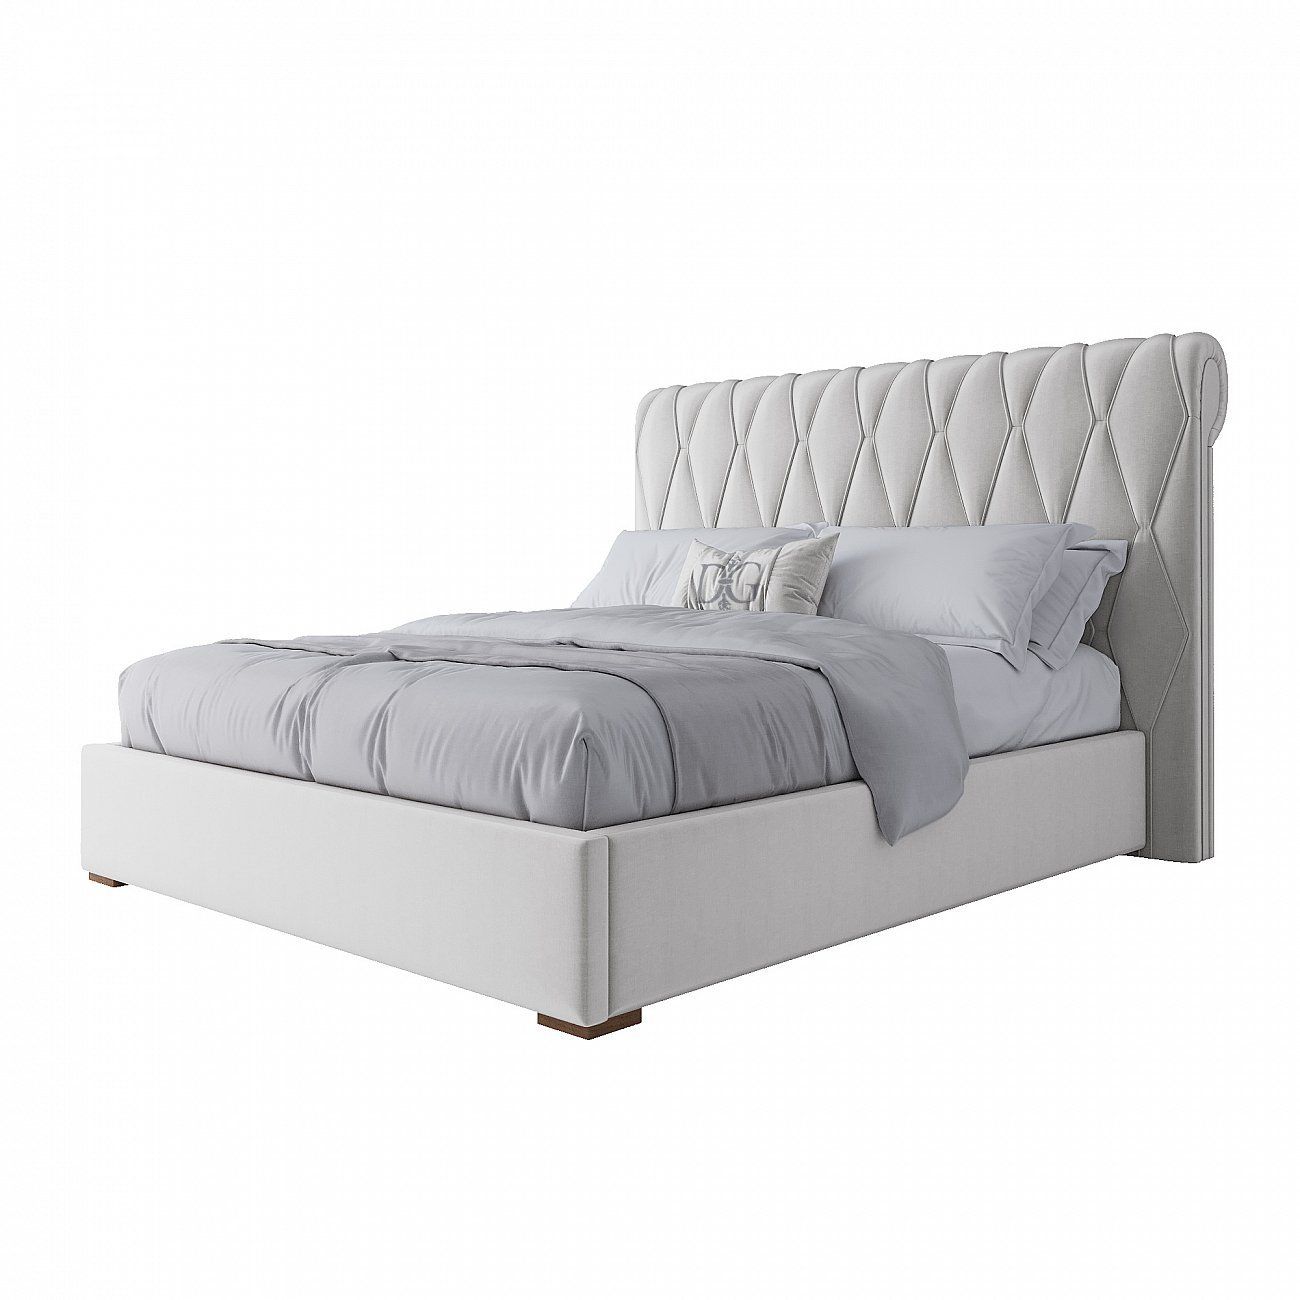 Double bed 160x200 white Bluemoon